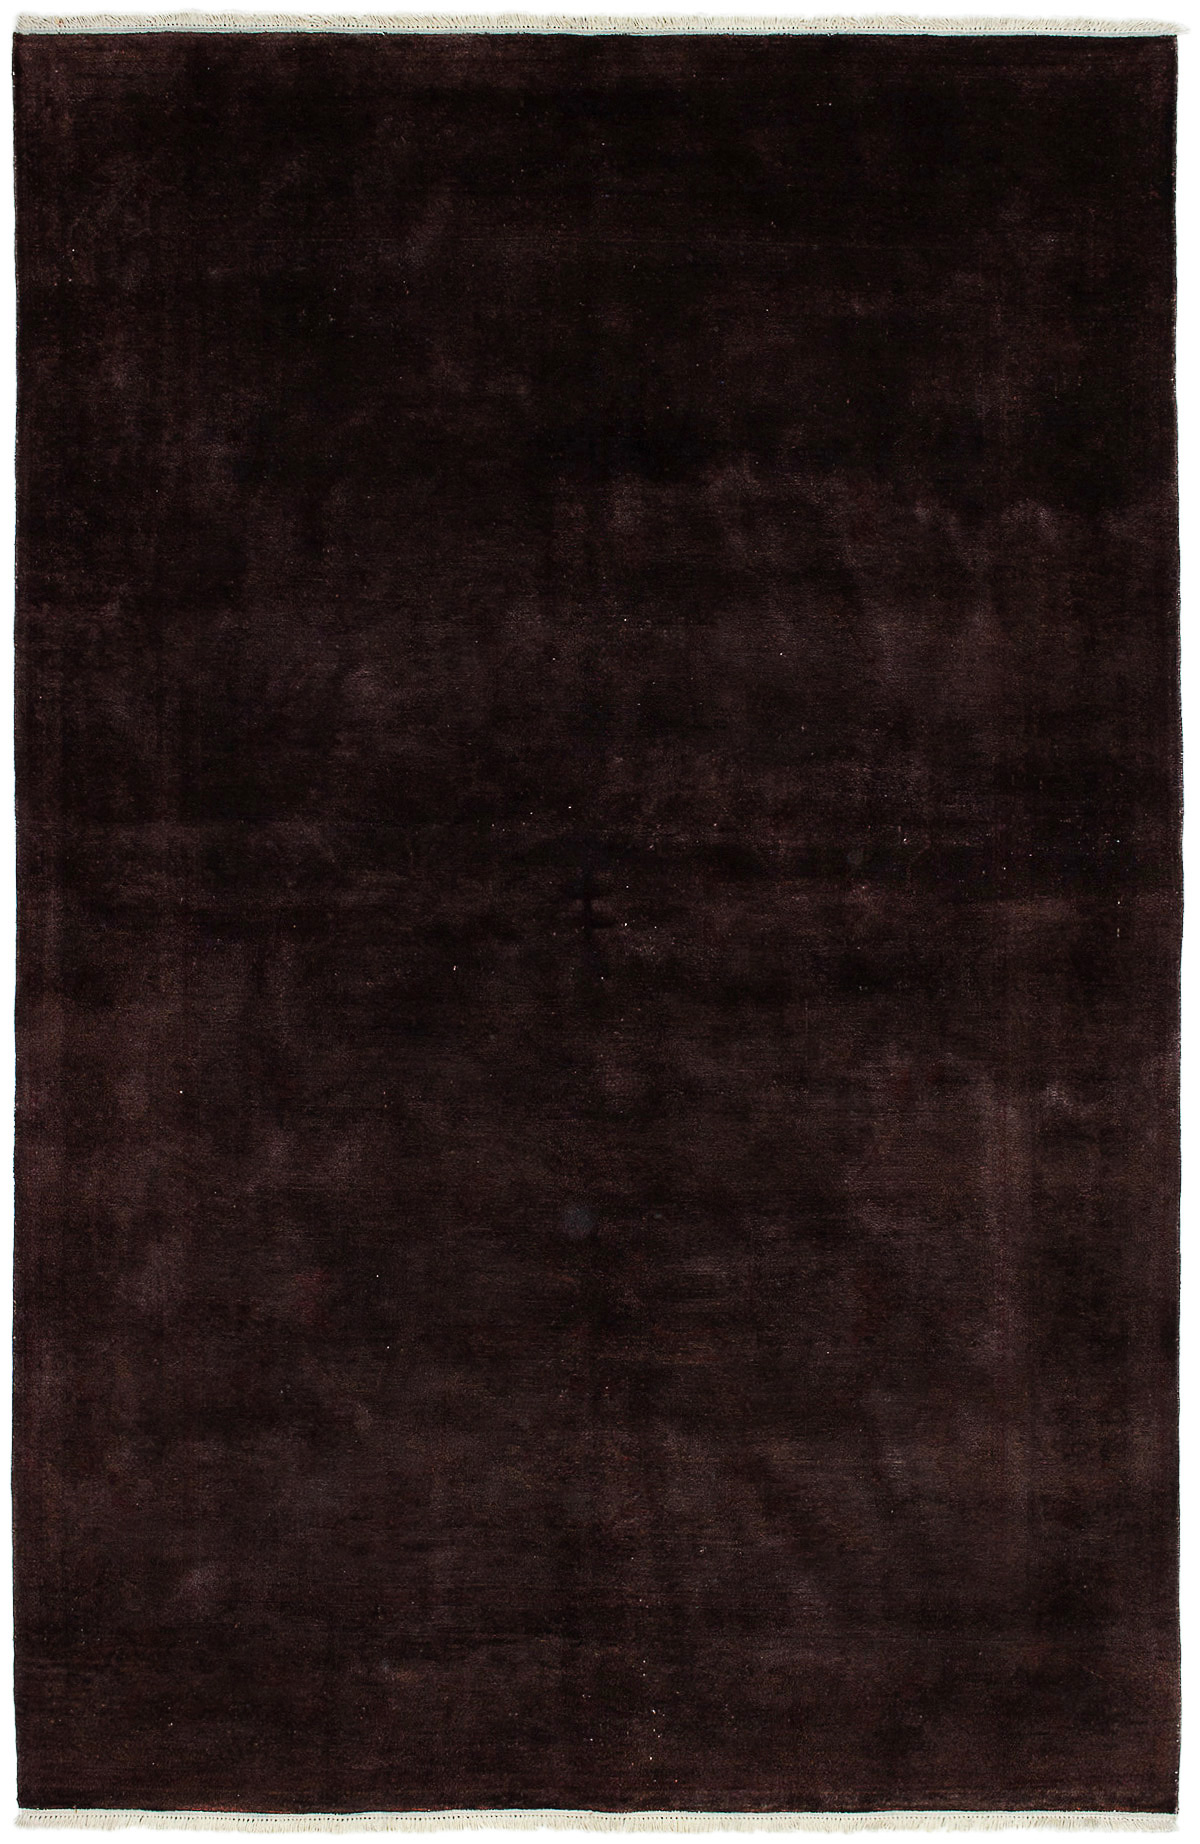 Hand-knotted Color transition Dark Brown Wool Rug 6'0" x 9'1" Size: 6'0" x 9'1"  